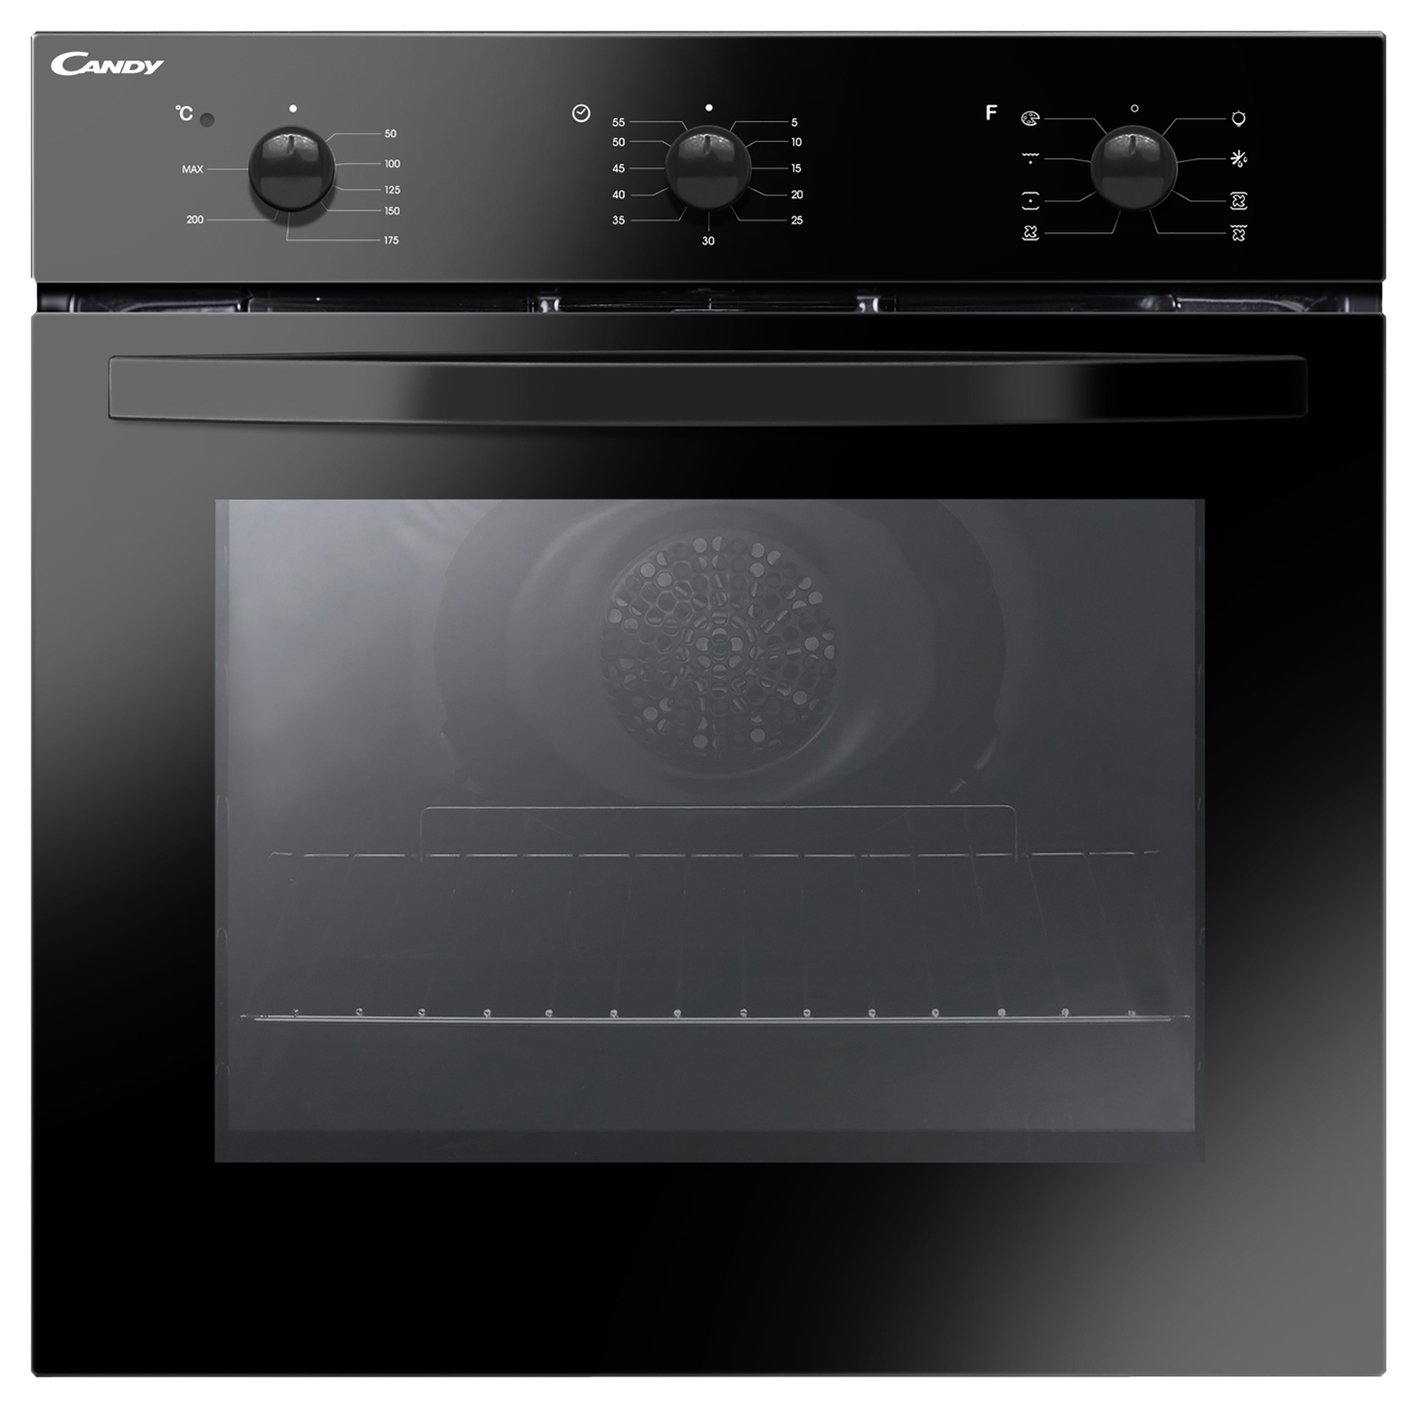 Candy FCS602N/E Multifunction Single Oven - Black